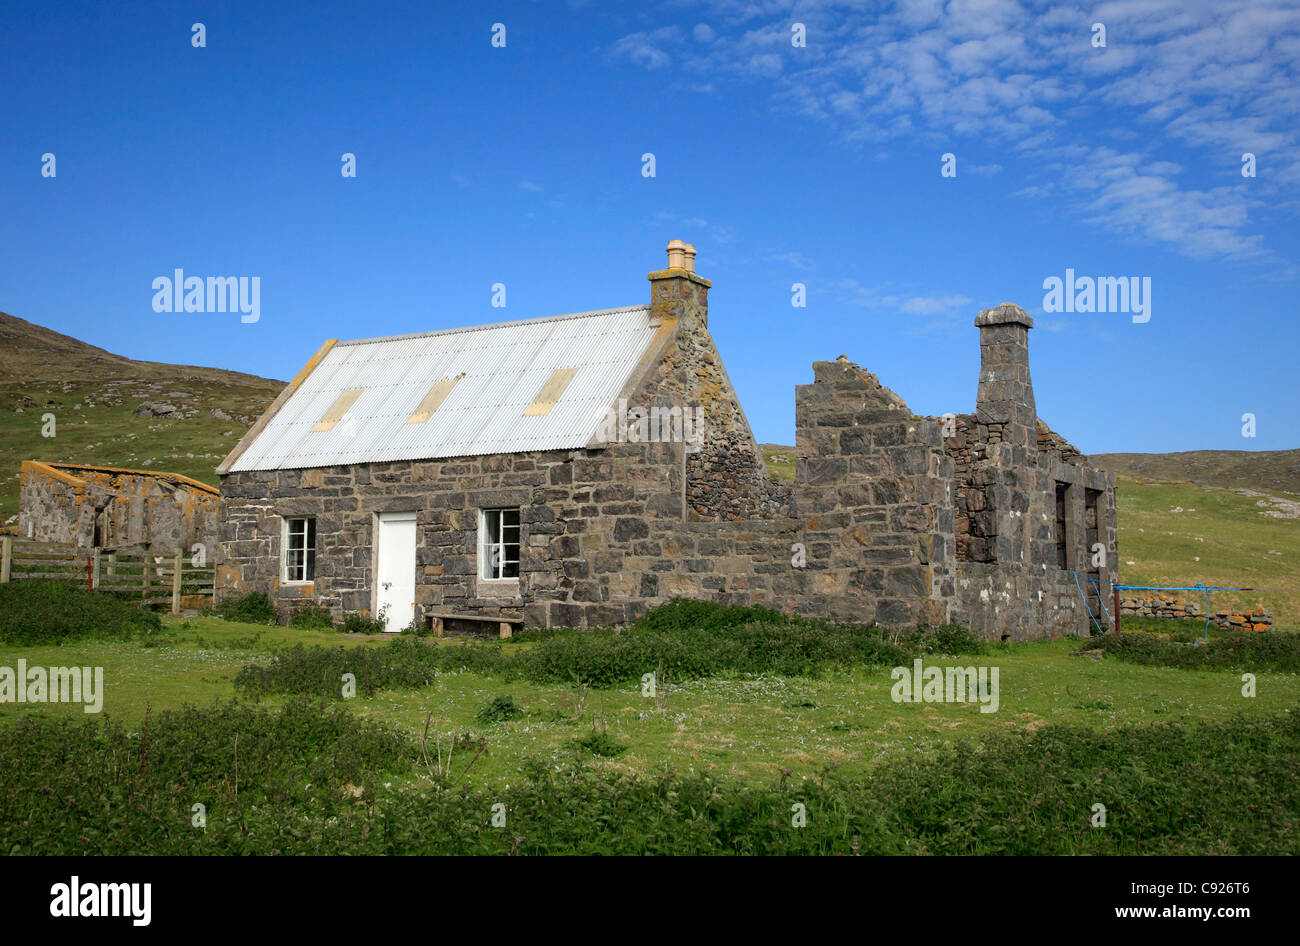 A stone house in a remote setting on the island of Mingulay in the Outer Hebrides, Scotland. Stock Photo